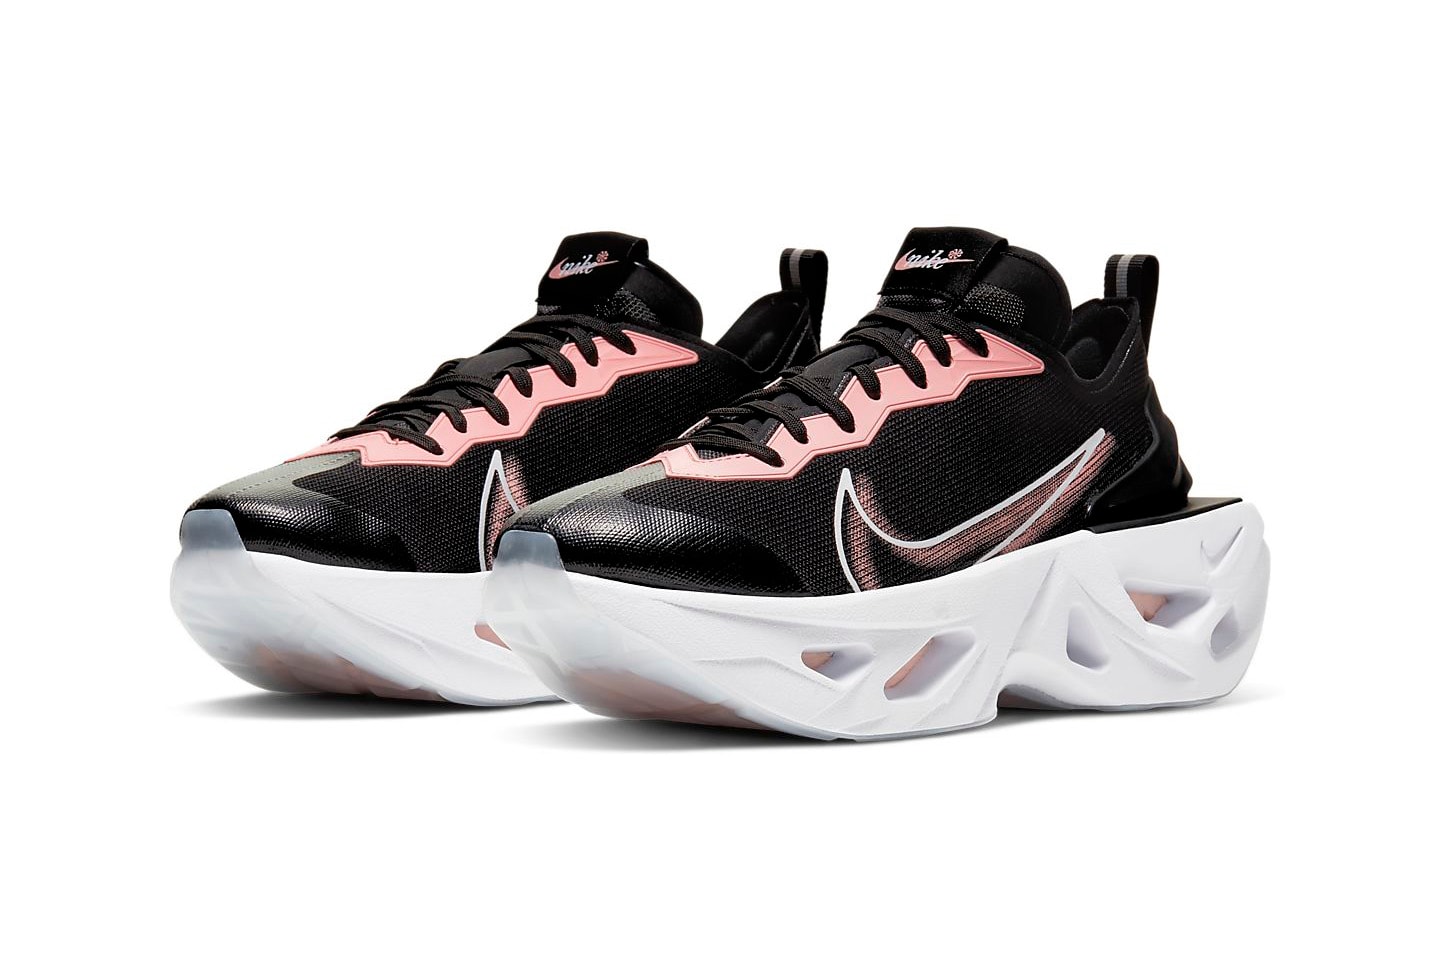 Nike Zoom X Vista Grind Sneakers Black Pink Chunky Sole Trainers